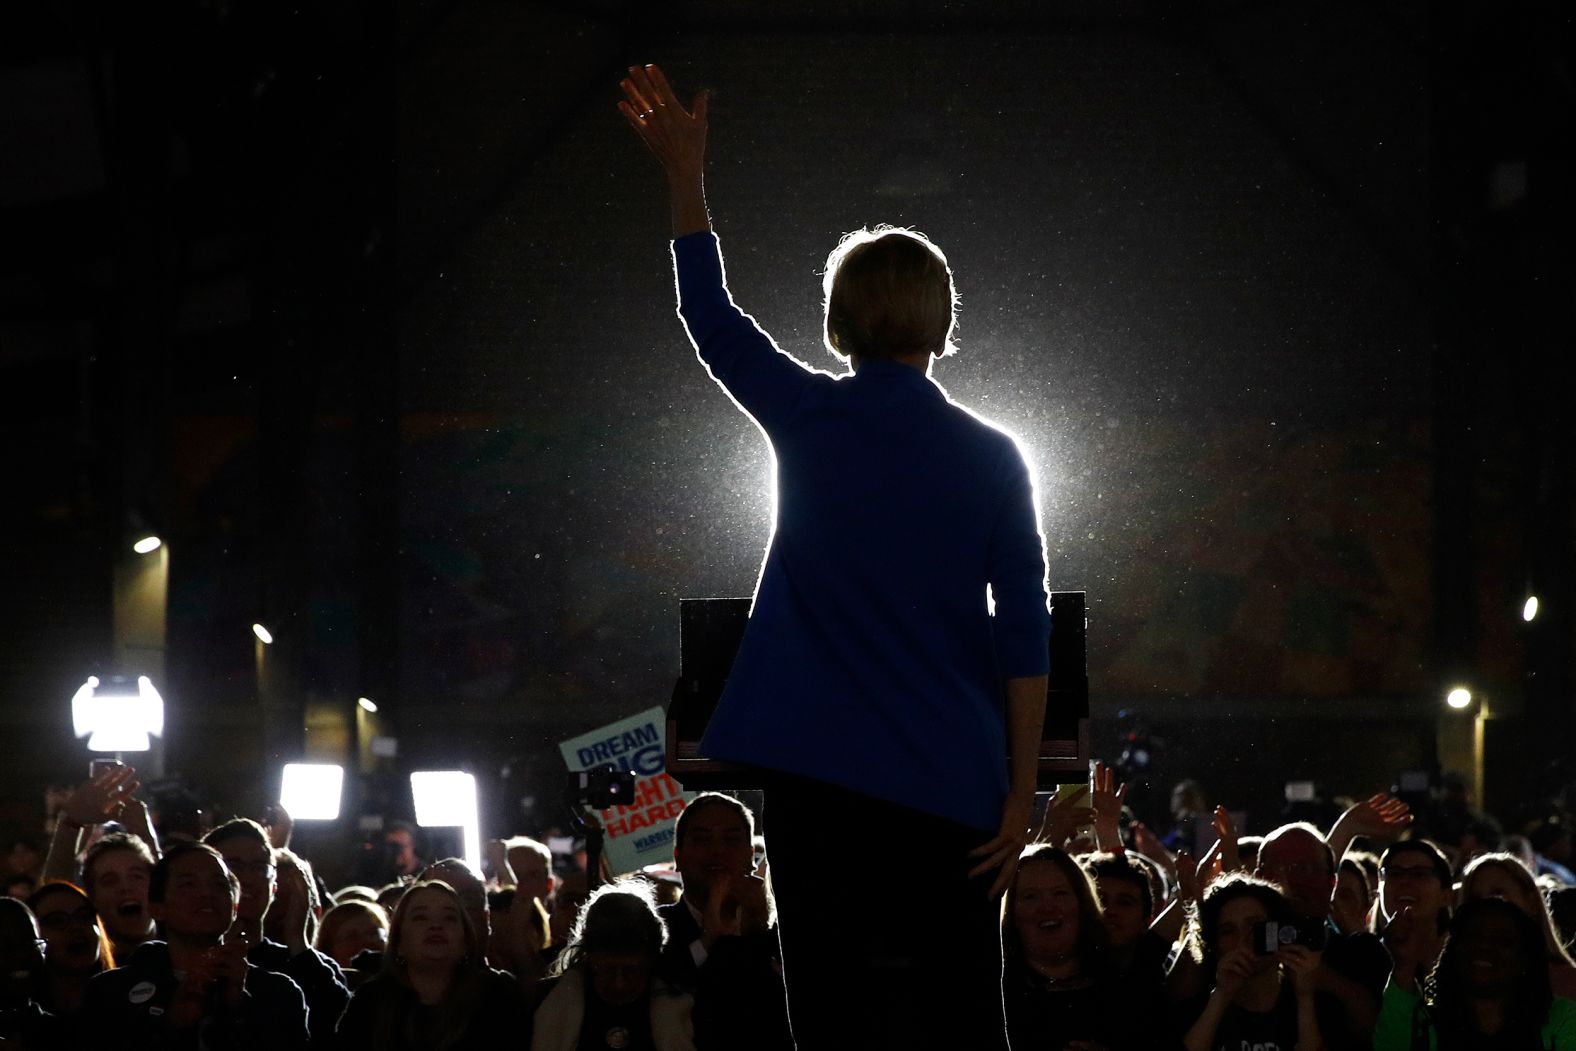 Warren speaks at her primary night rally in Detroit. After finishing third in her home state, <a href="index.php?page=&url=https%3A%2F%2Fwww.cnn.com%2Fpolitics%2Flive-news%2Fsuper-tuesday-results-2020%2Fh_dd258ca06afcc12dfc4ba047e2a105d0" target="_blank">she now has a decision to make.</a>